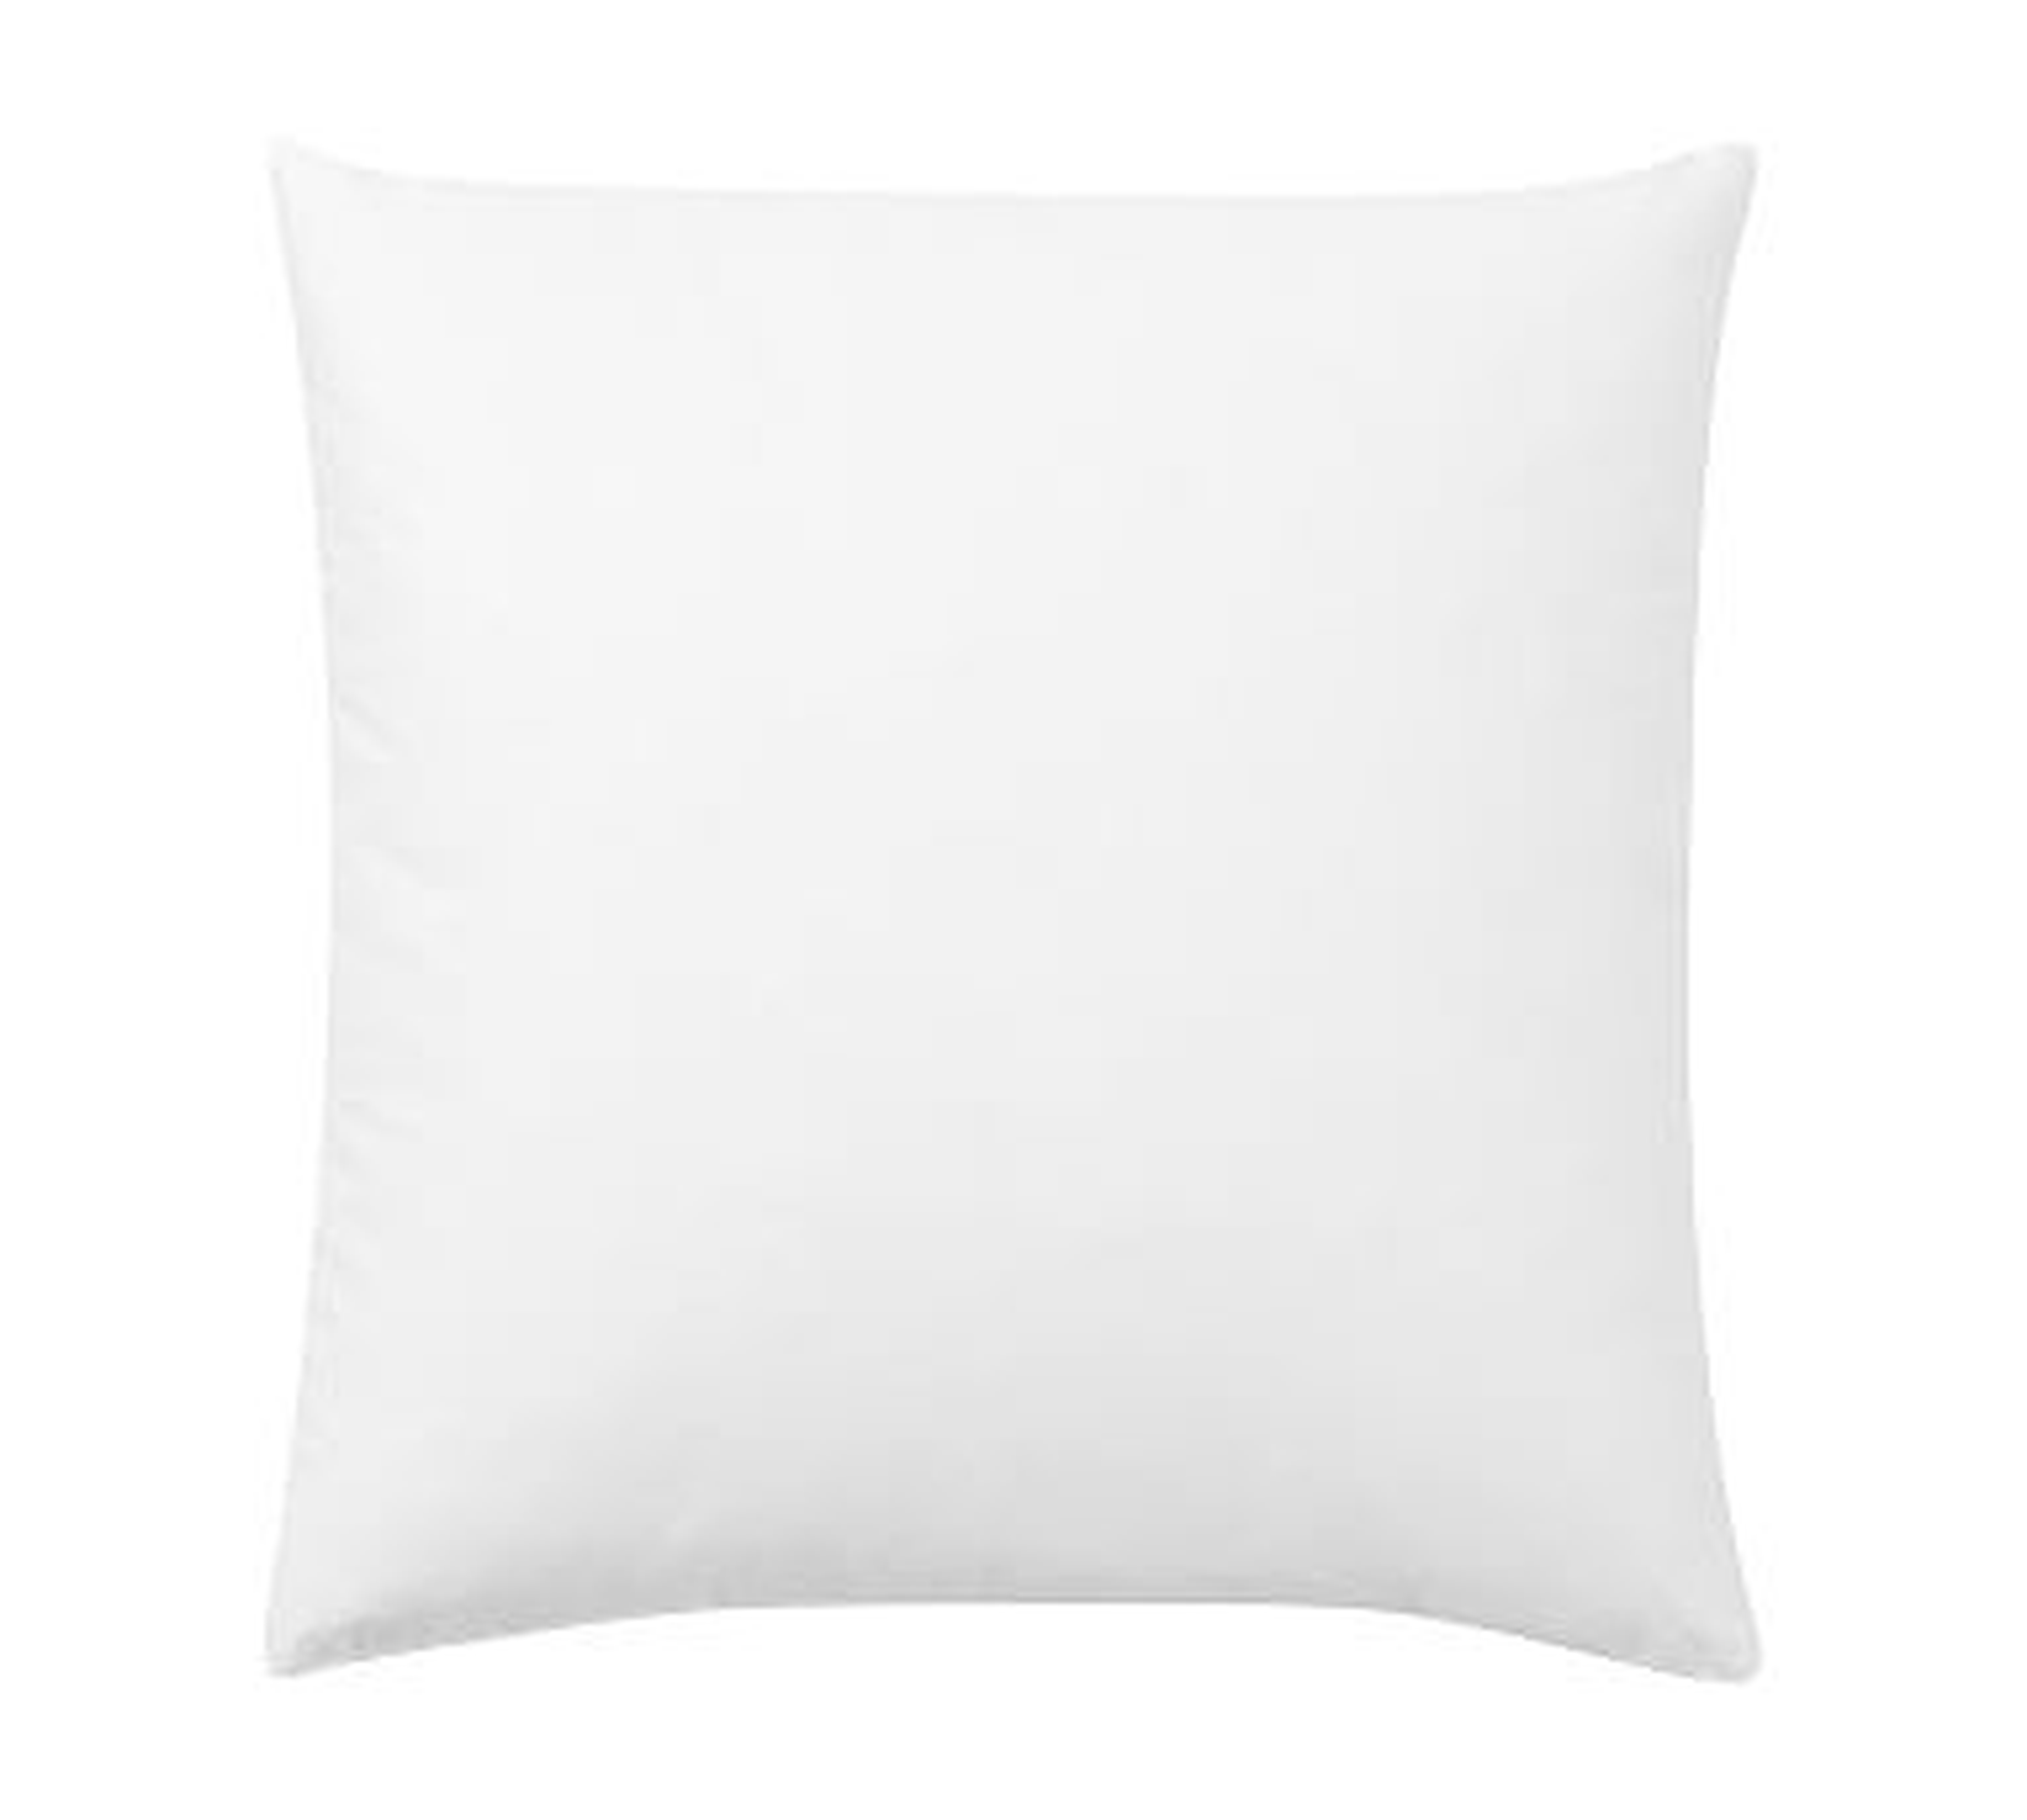 Down Feather Pillow Insert, 20" sq. - Pottery Barn